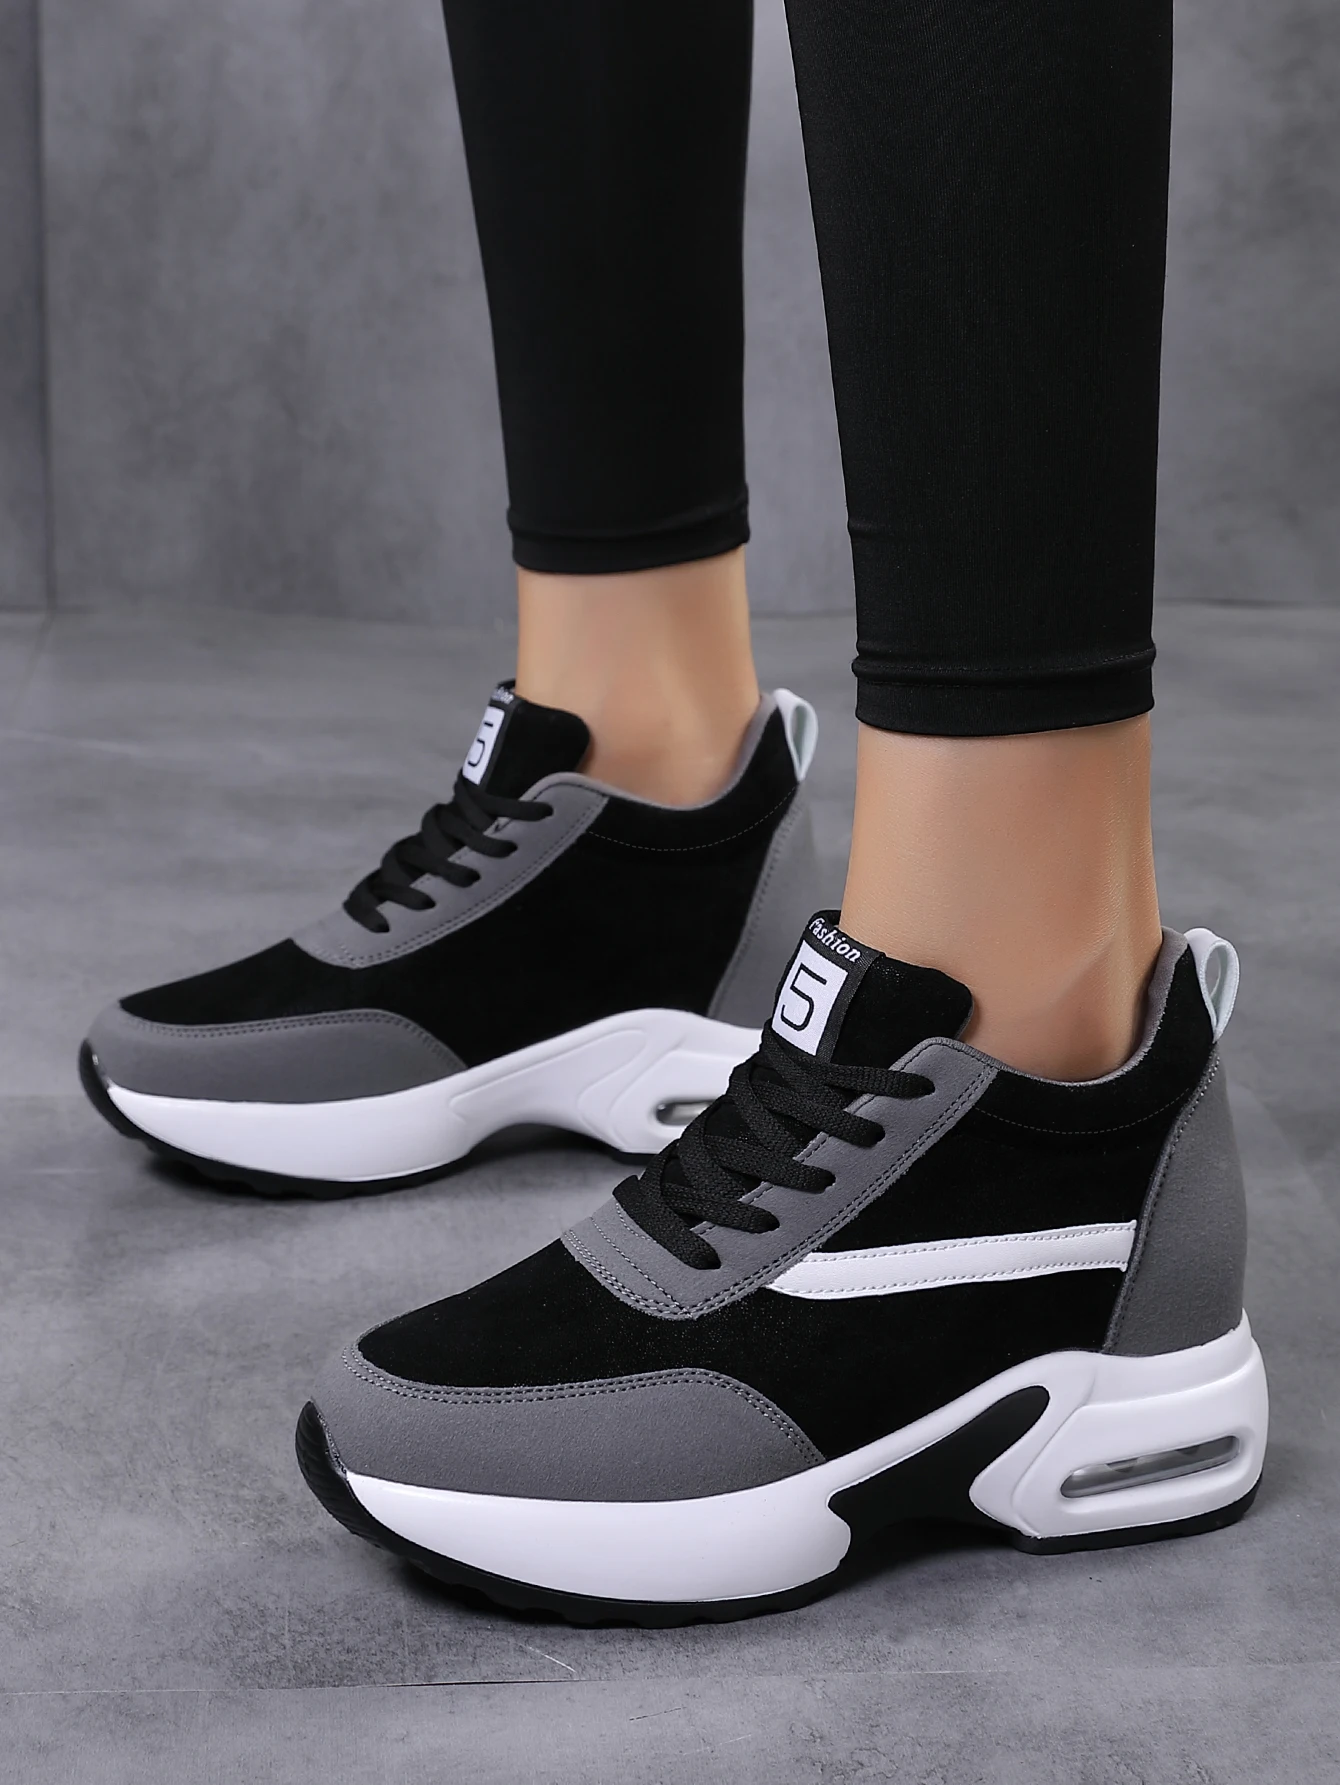 

9 cm Wedge Sneakers Lady Lace Up Casual Sport Shoes Women Hidden Inner Heightening Shoes Comfort Platform Walking Shoes 20266 v